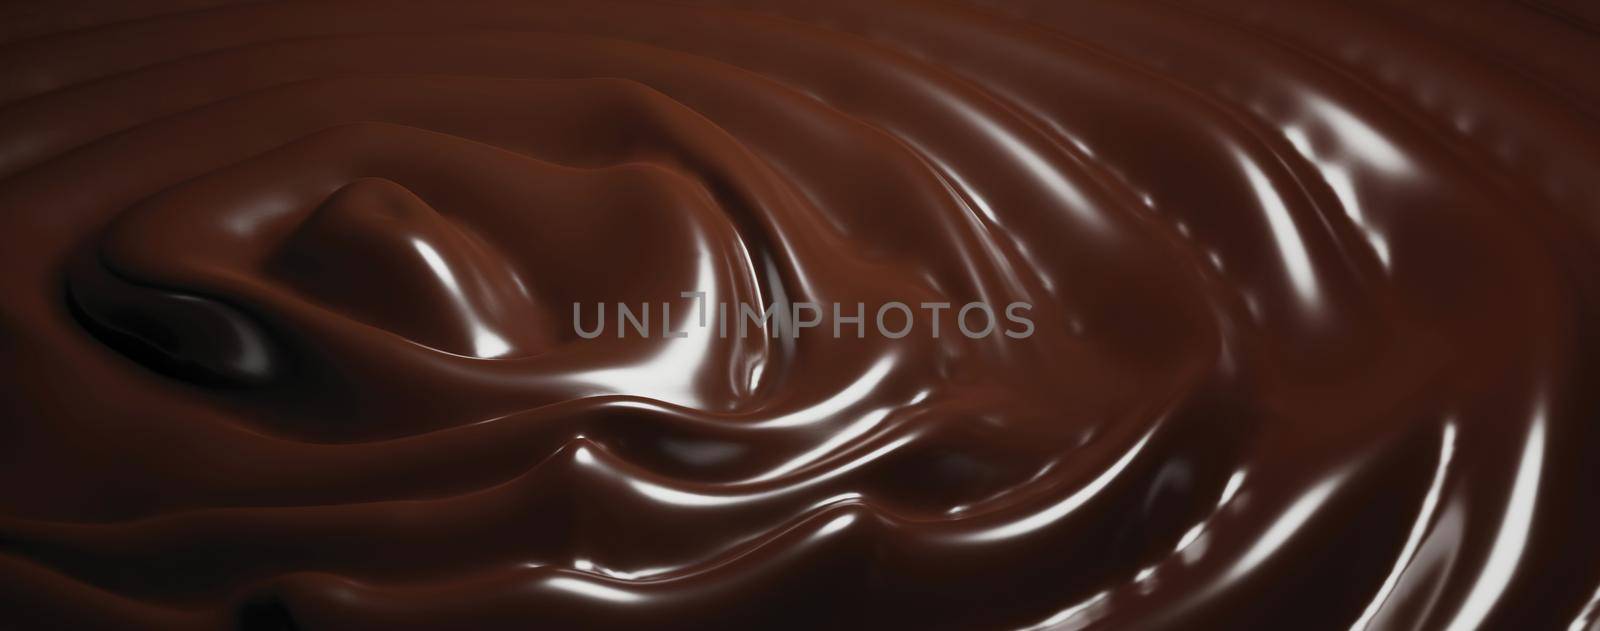 Chocolate wavvy background 3d render